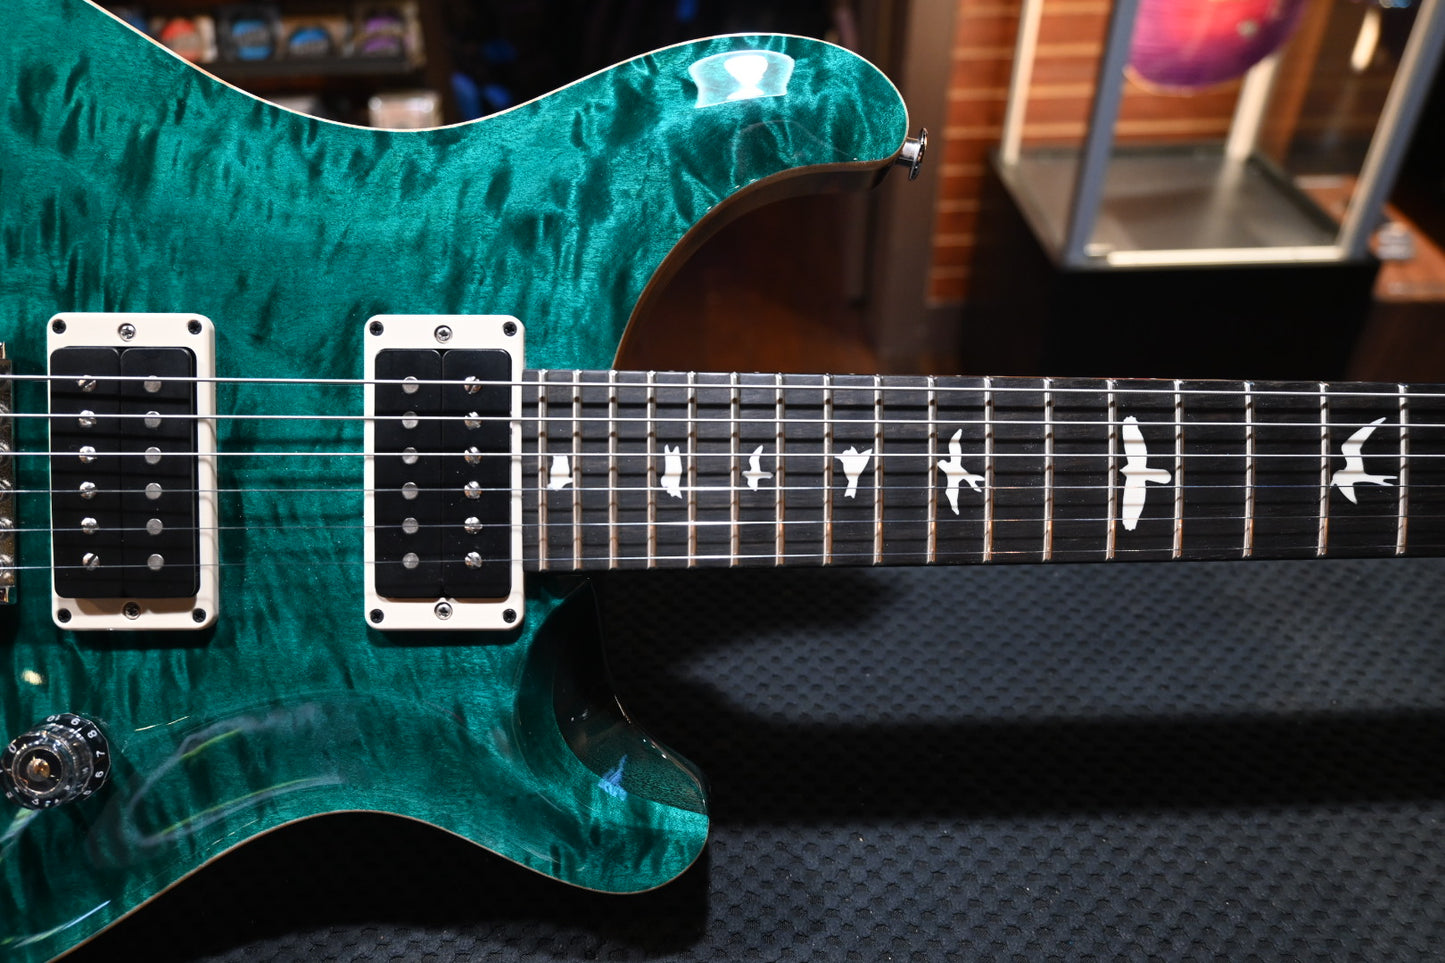 PRS Wood Library CE 24 Quilt - Turquoise Guitar #3693 - Danville Music